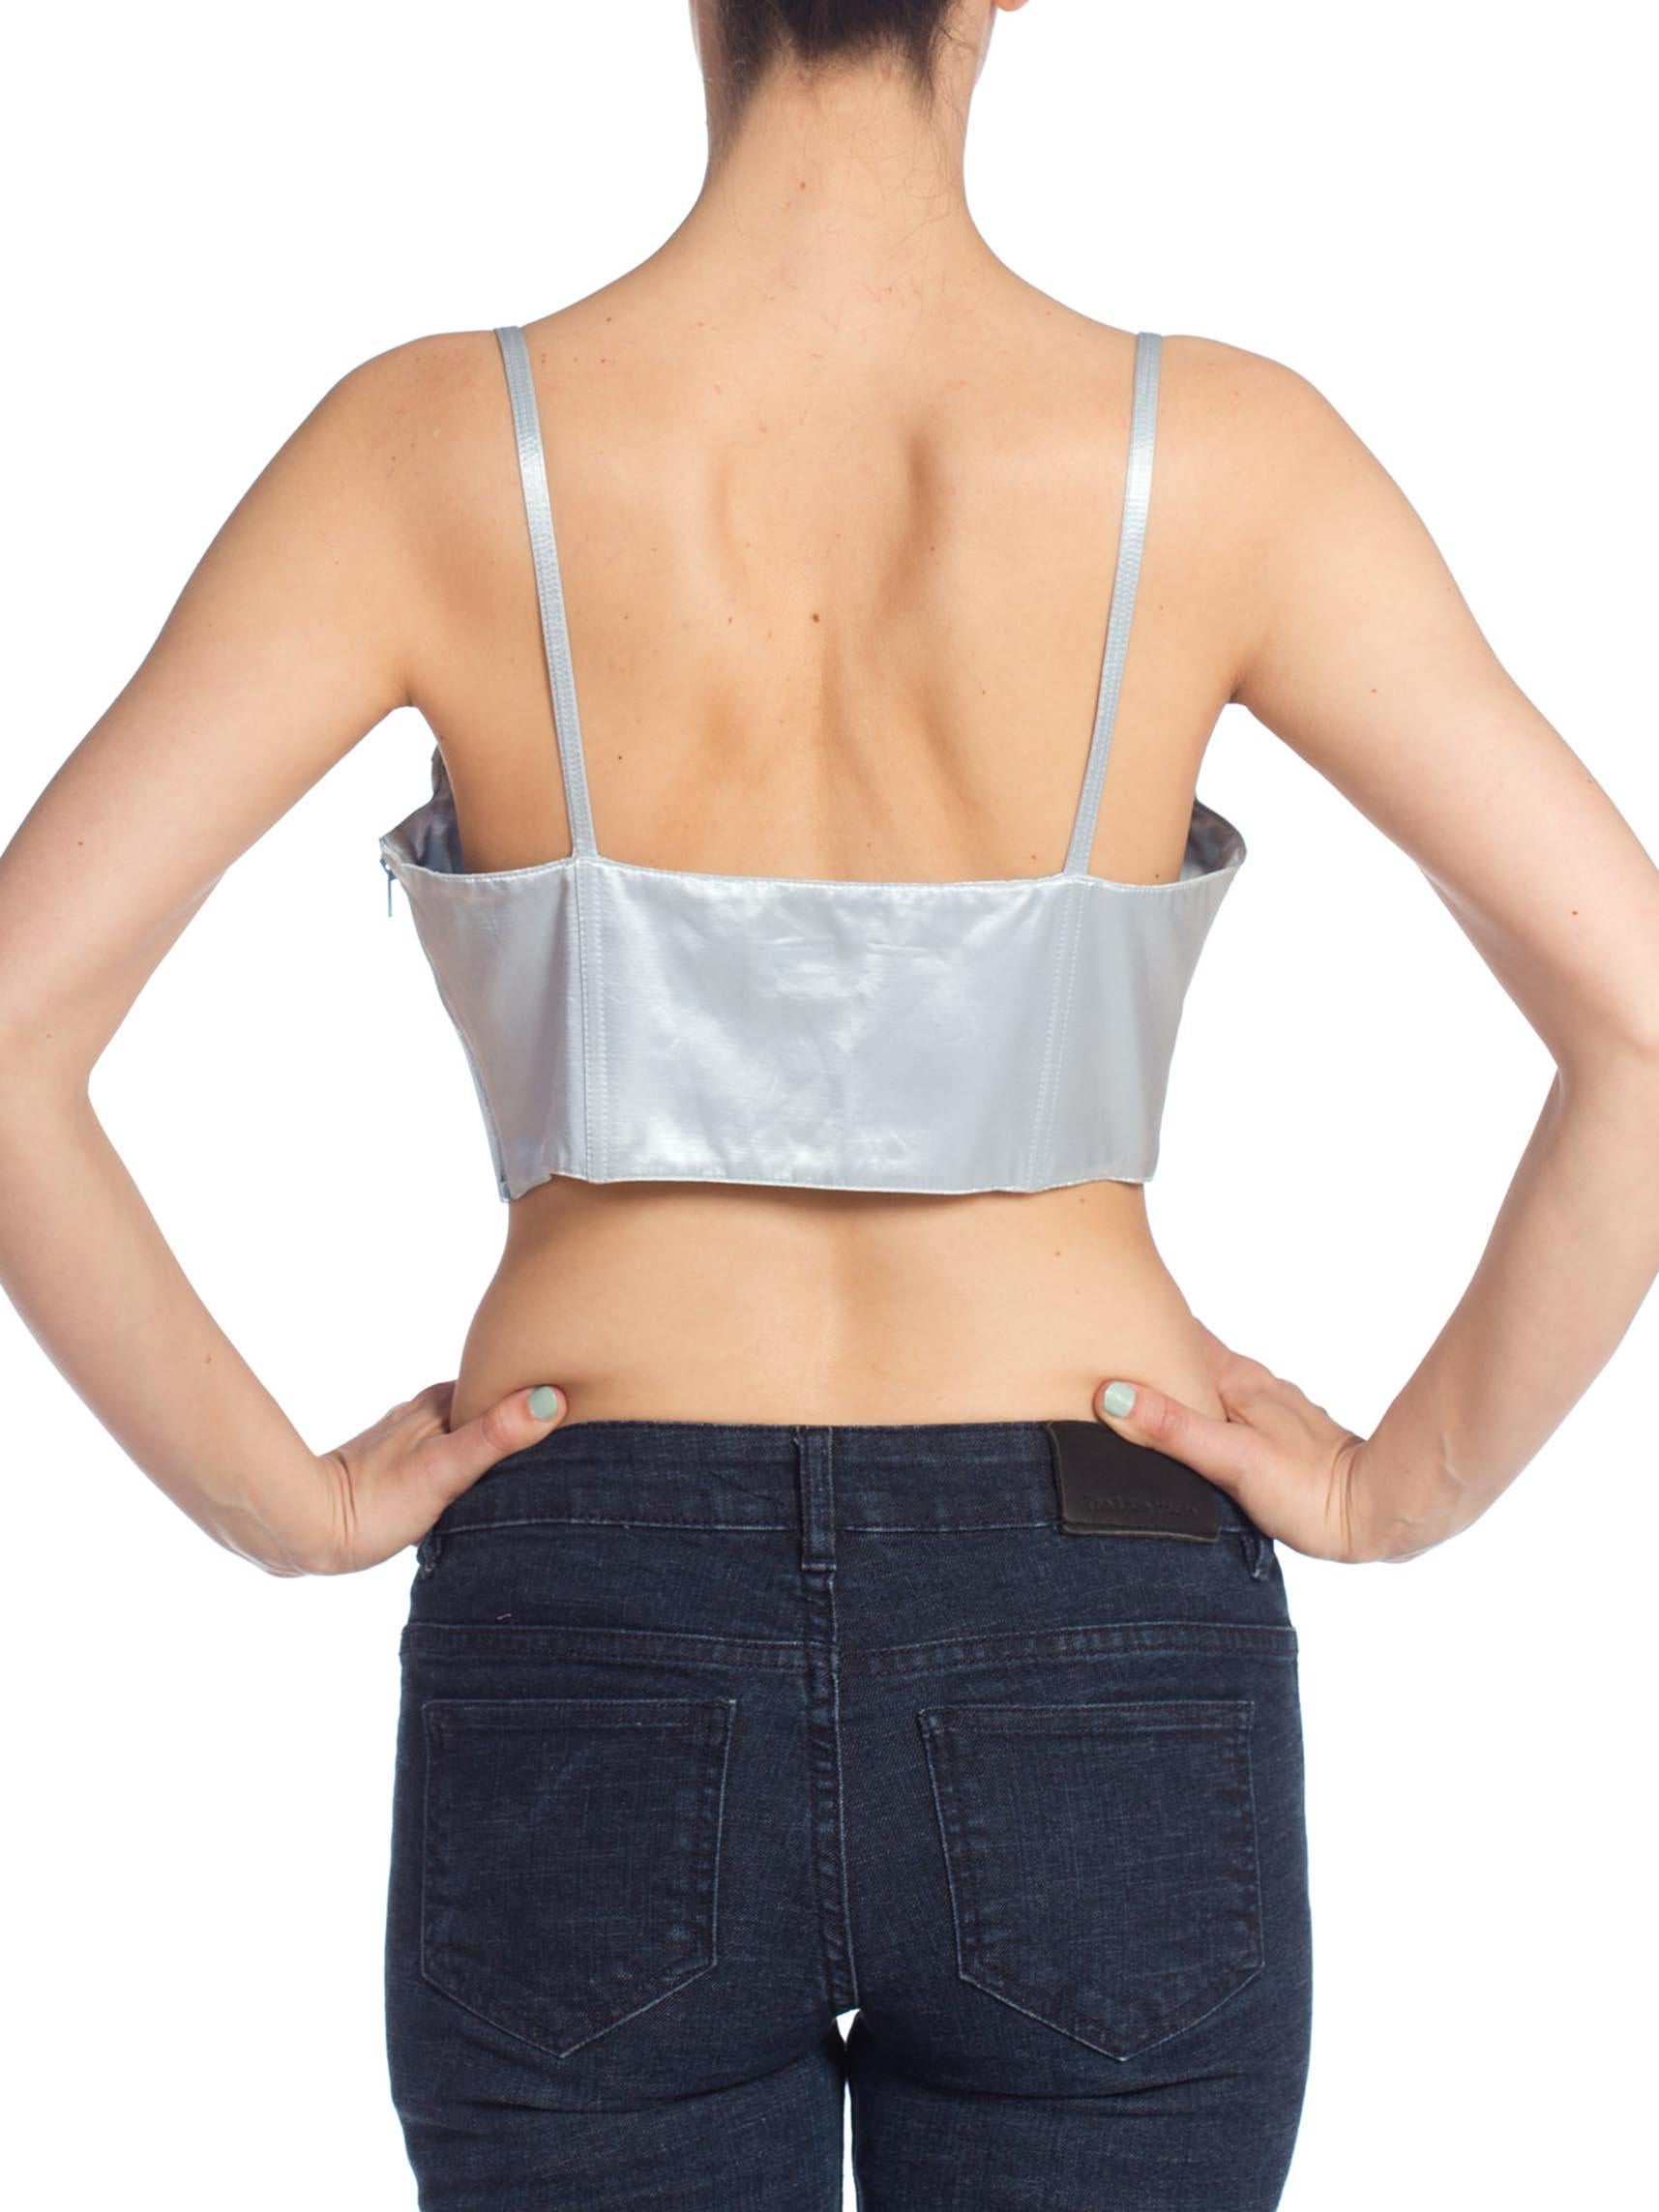 Gray 1990'S GIANNI VERSACE Baby Blue Satin Bra Top Buster Bustier For Sale